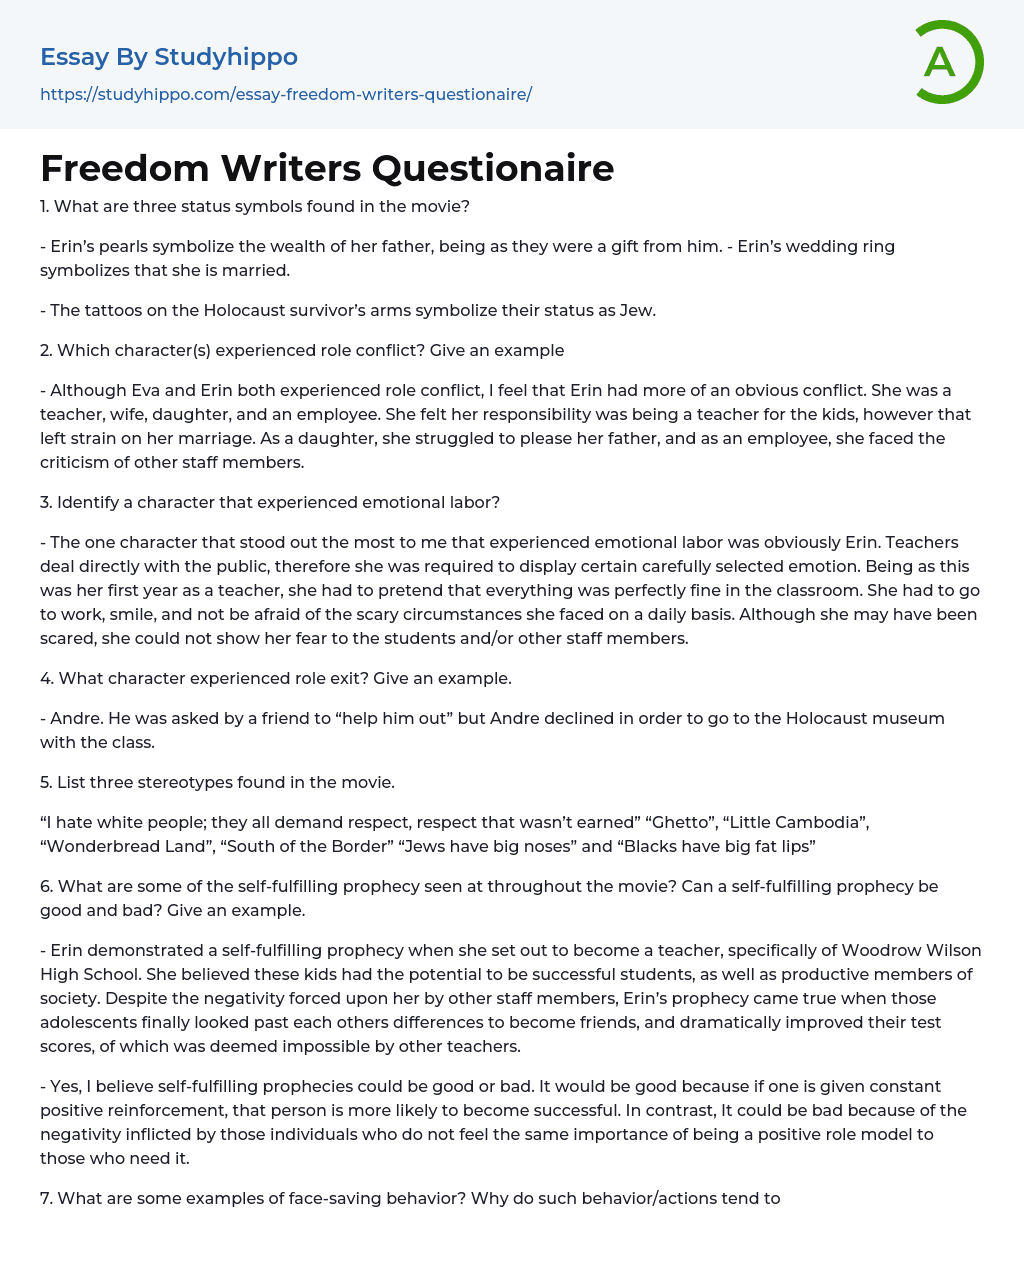 Freedom Writers Questionaire Essay Example